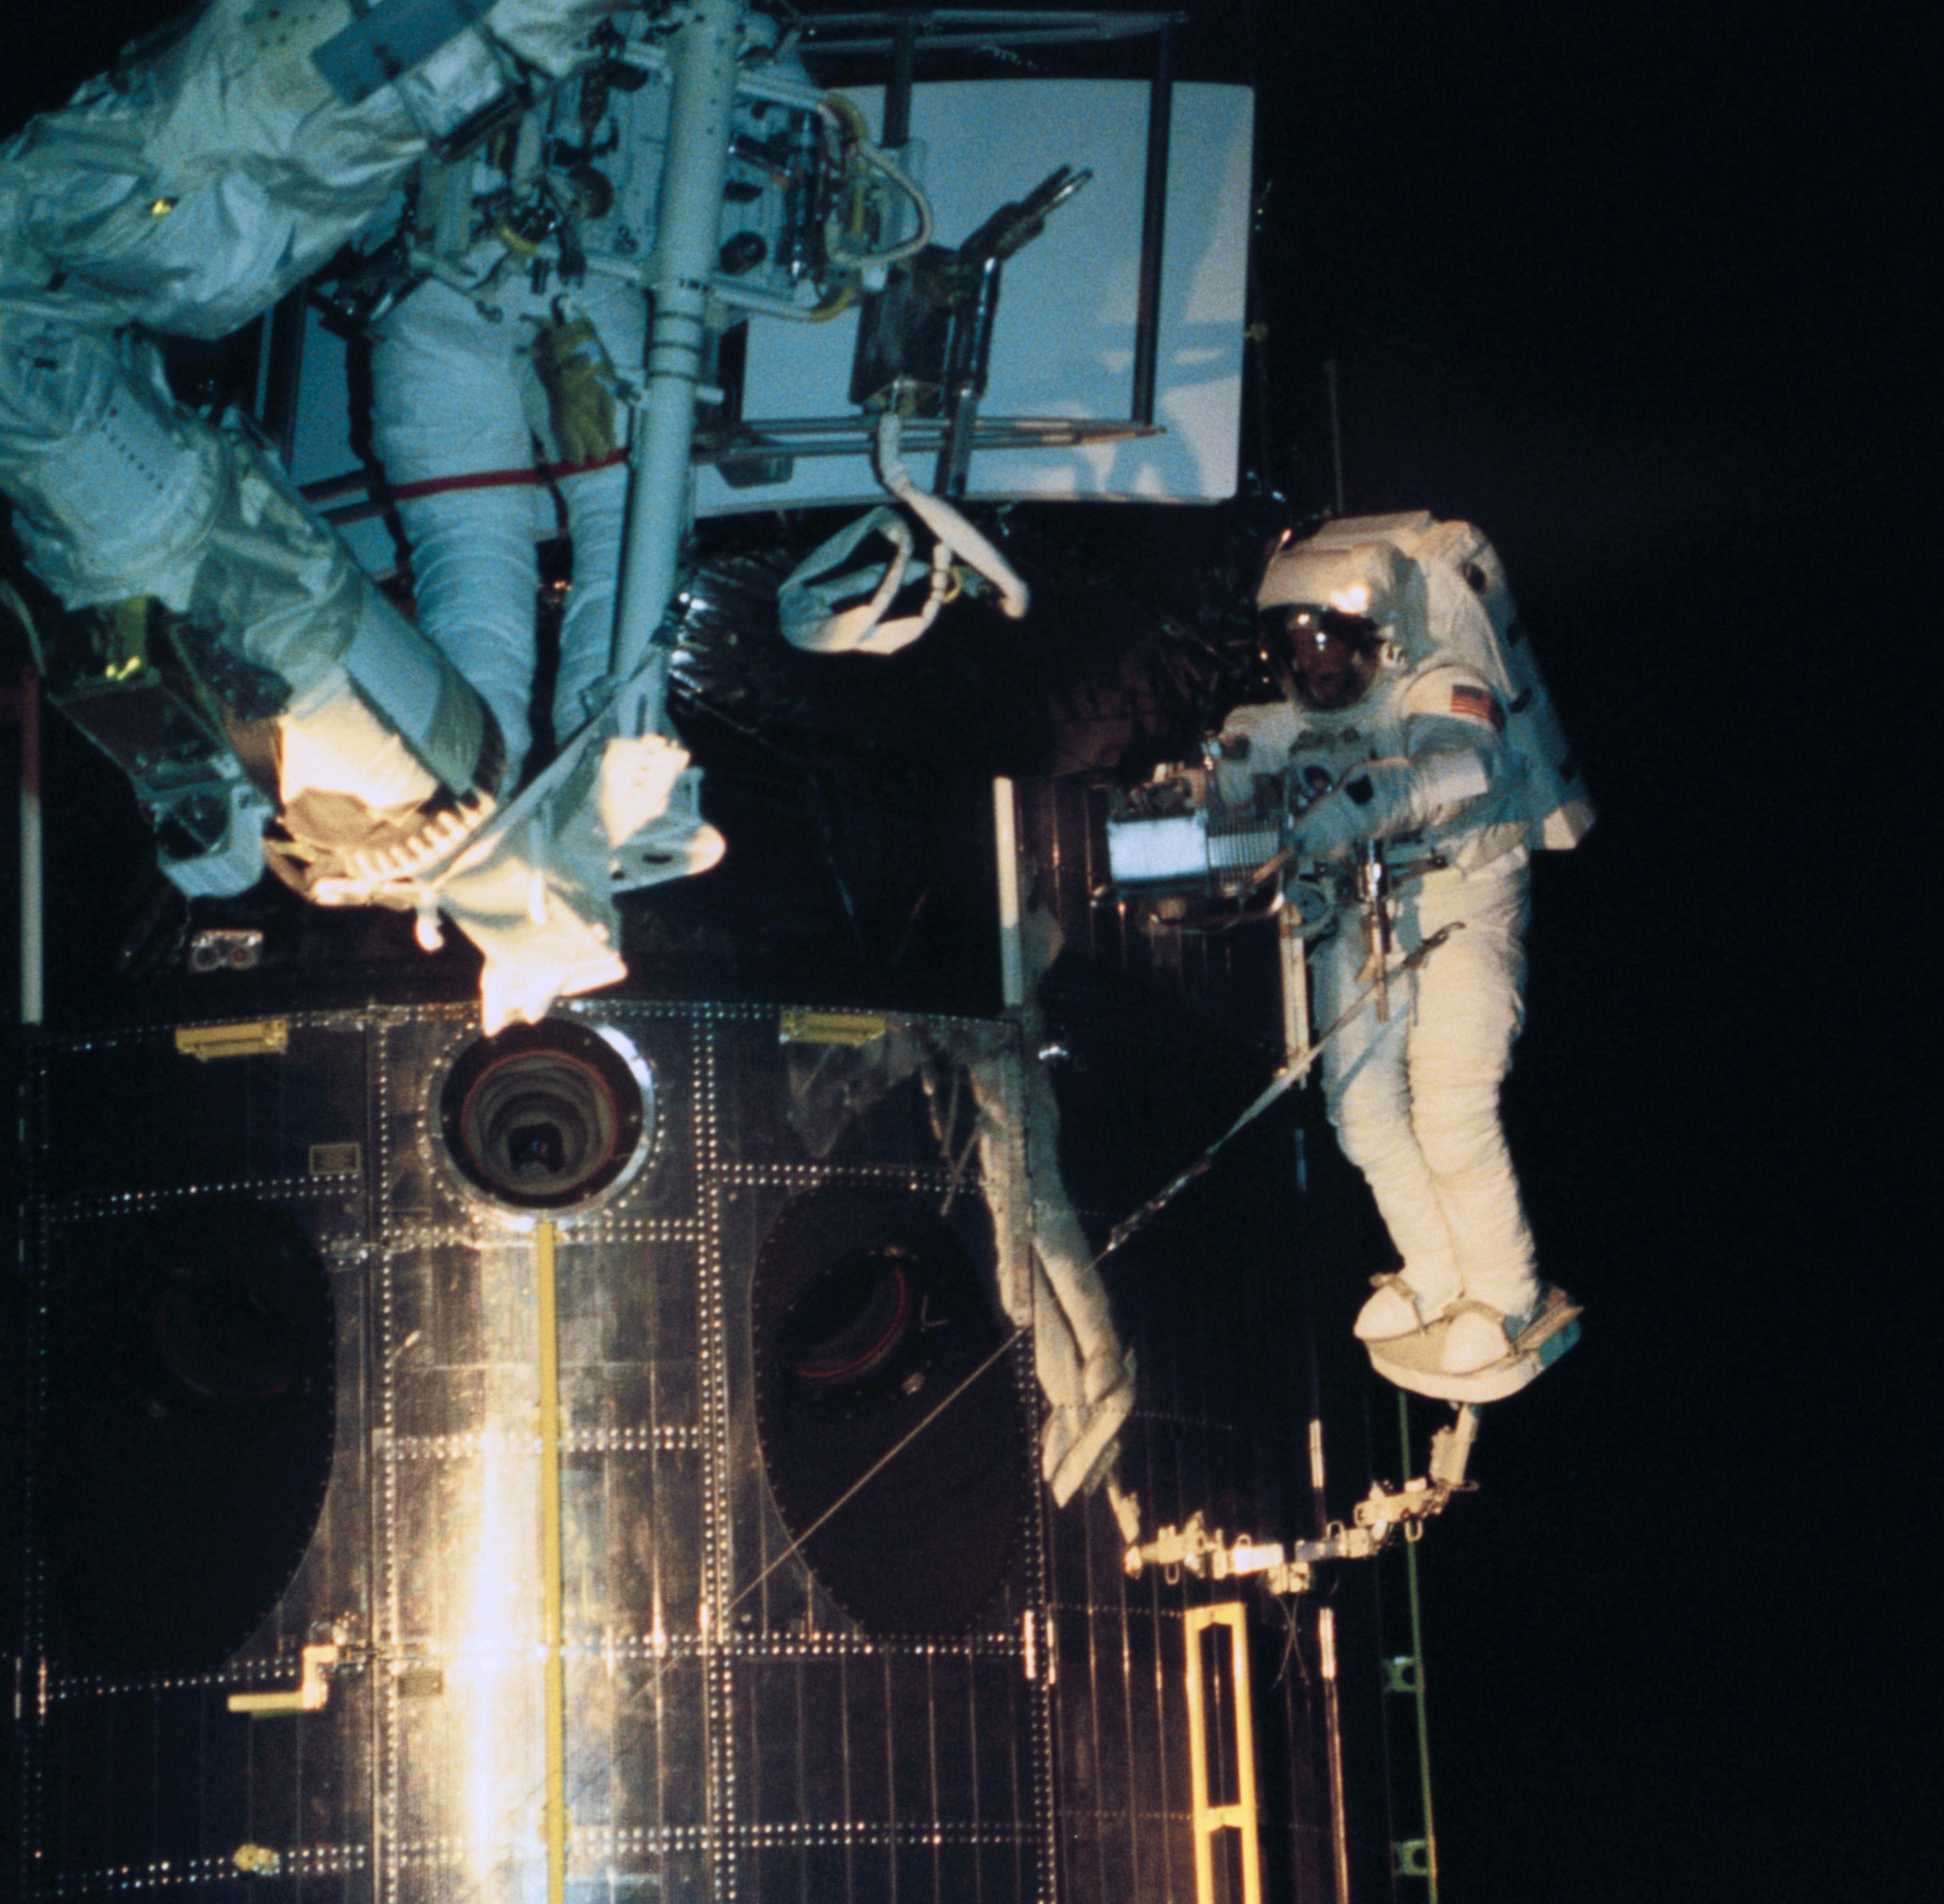 With European Space Agency astronaut Claude Nicollier operating the Remote Manipulator System from inside the shuttle, Hoffman guides the new WFPC2 into position, with Musgrave ready to assist